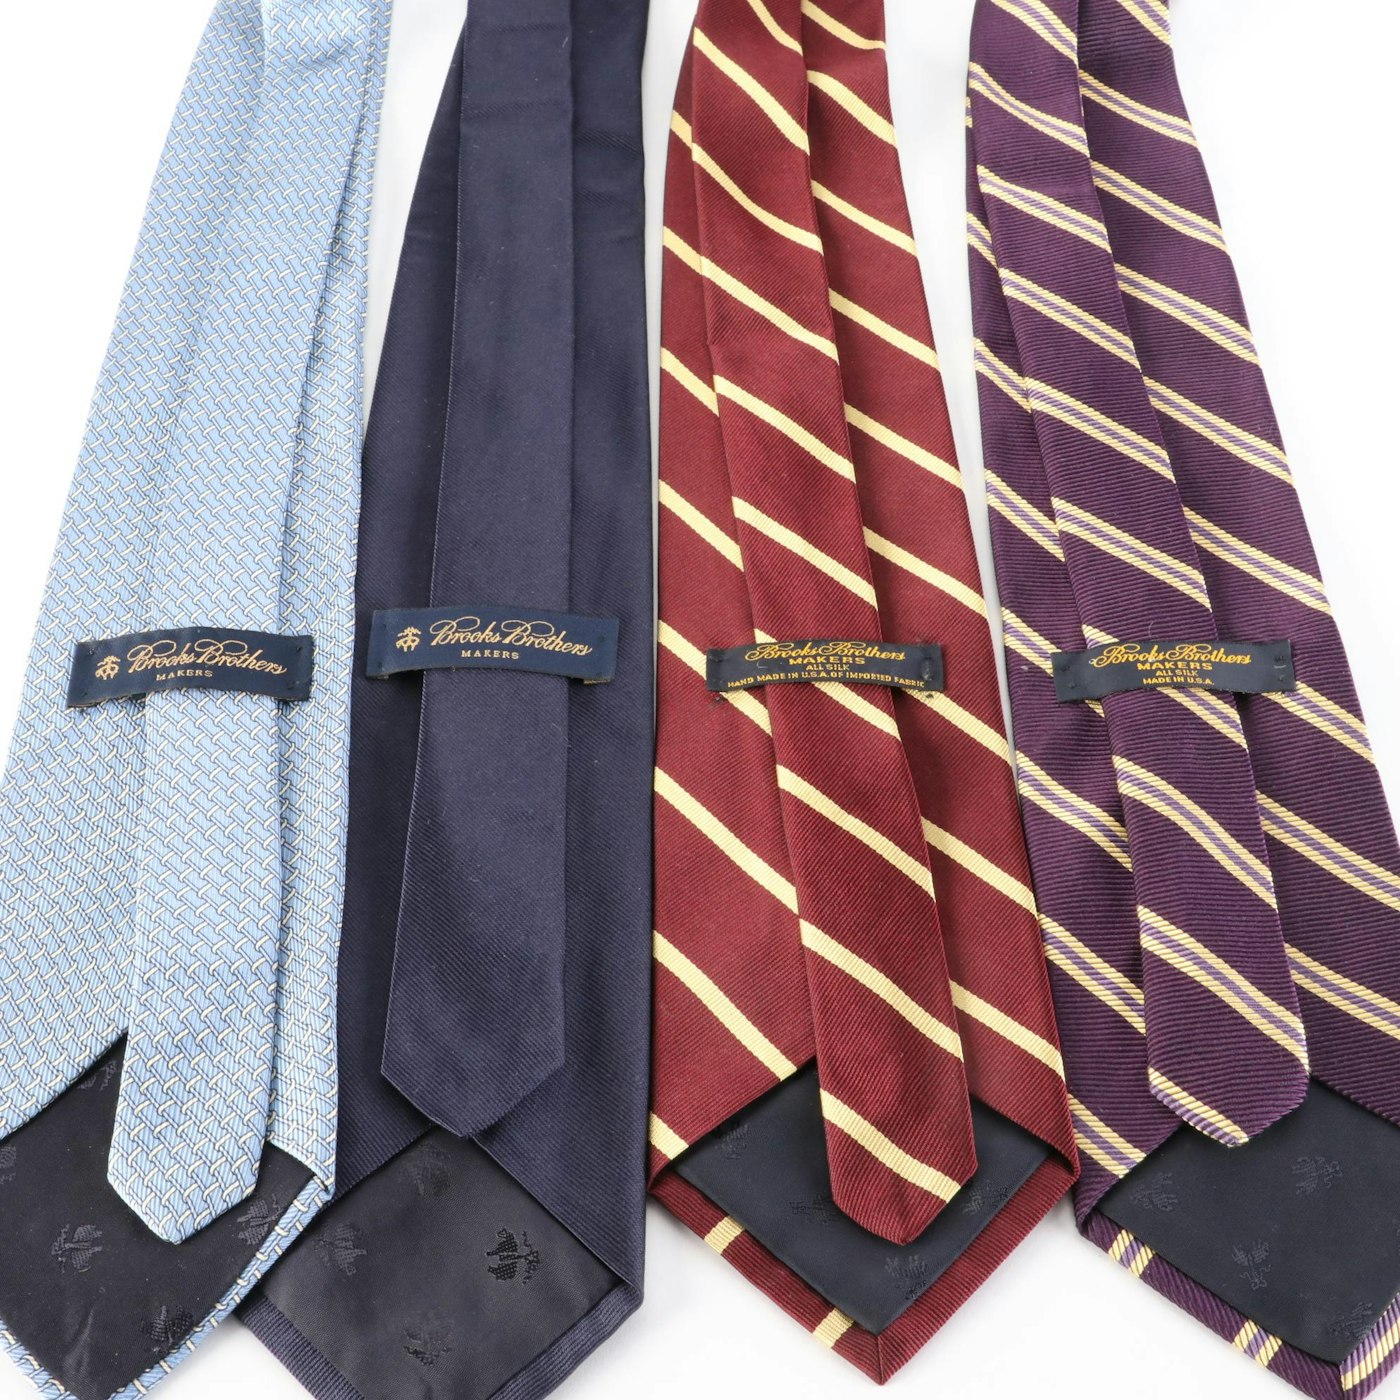 Brooks Brothers Patterned, Striped and Solid Color Silk Neckties | EBTH